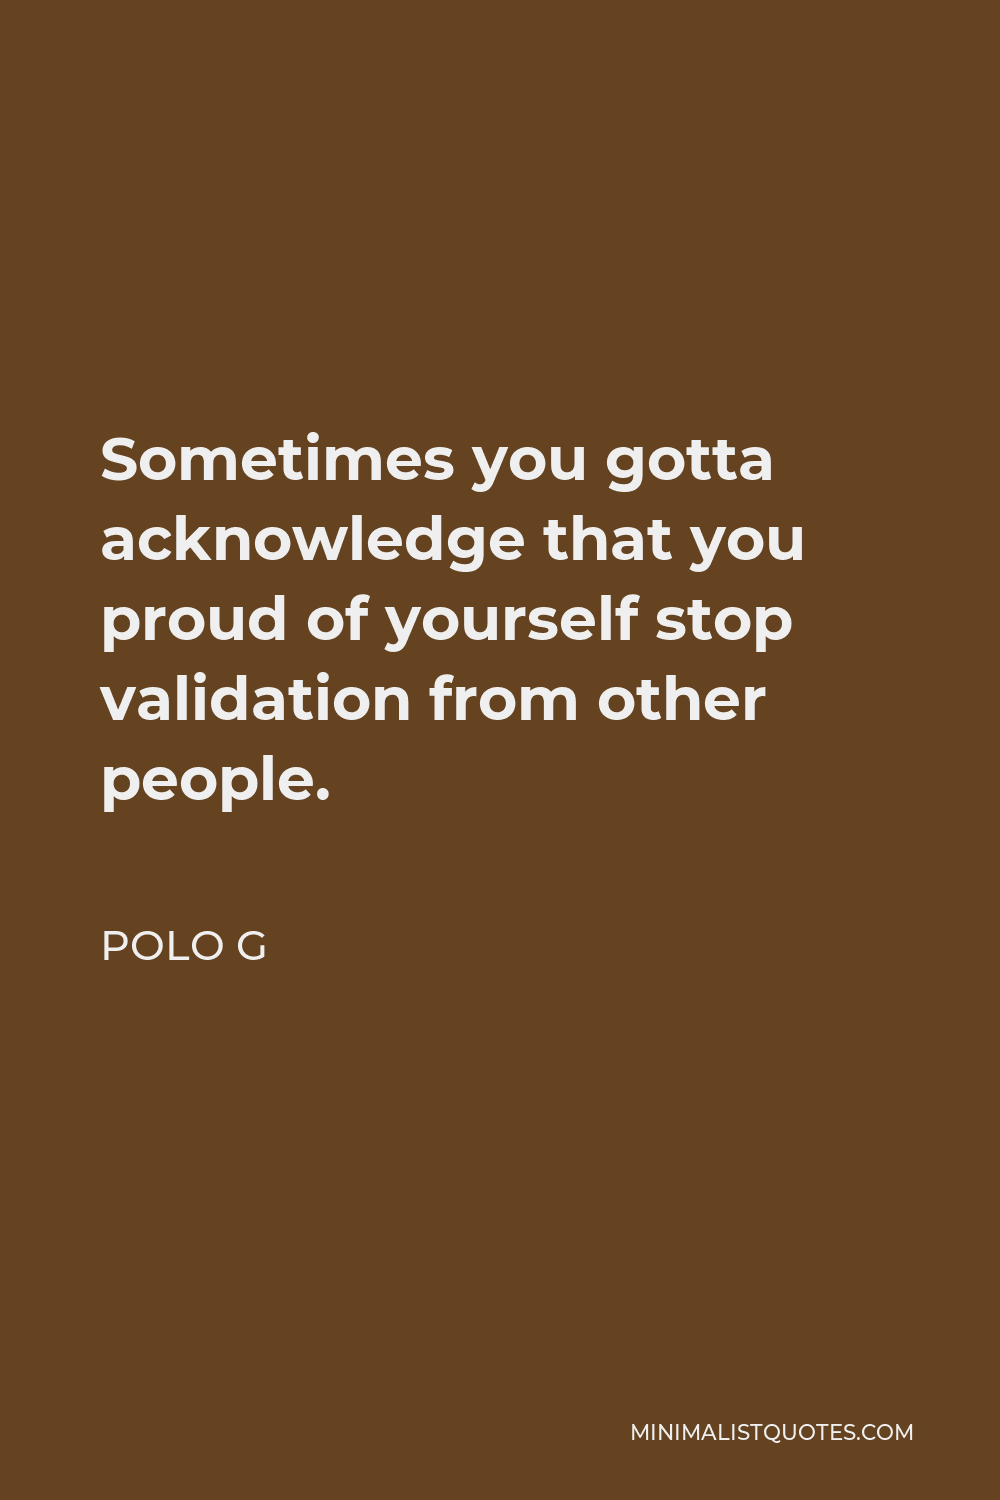 Polo G Quote - Sometimes you gotta acknowledge that you proud of yourself stop validation from other people.